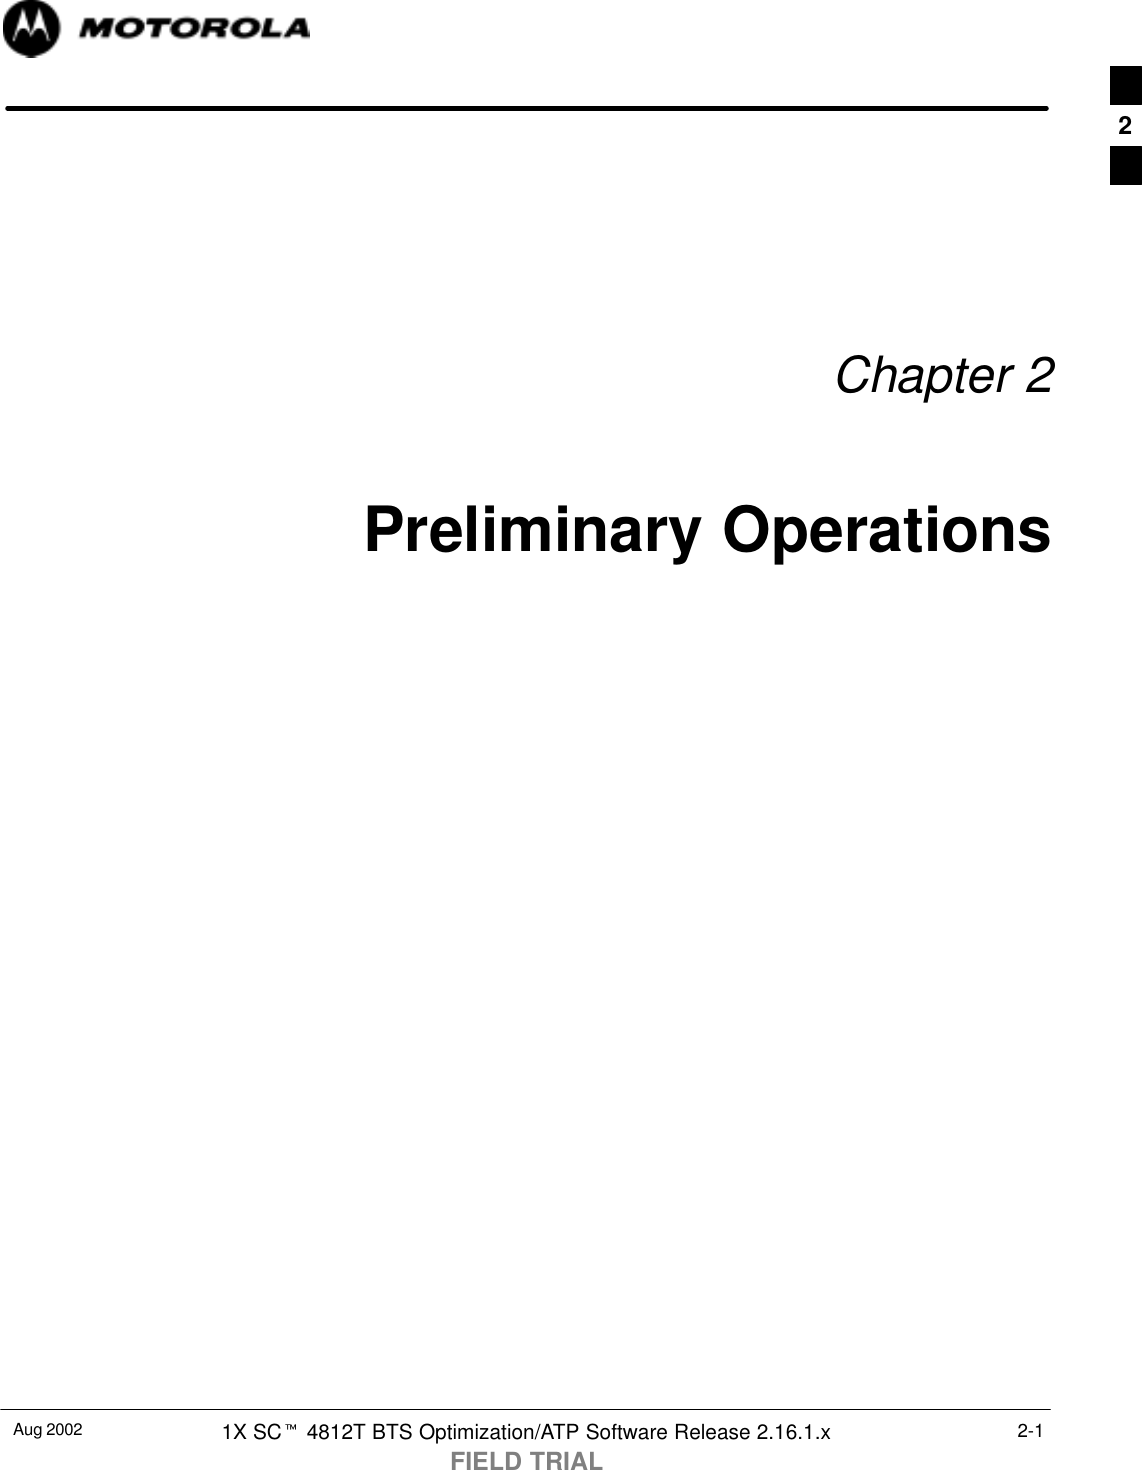 Aug 2002 1X SCt 4812T BTS Optimization/ATP Software Release 2.16.1.xFIELD TRIAL2-1Chapter 2Preliminary Operations2